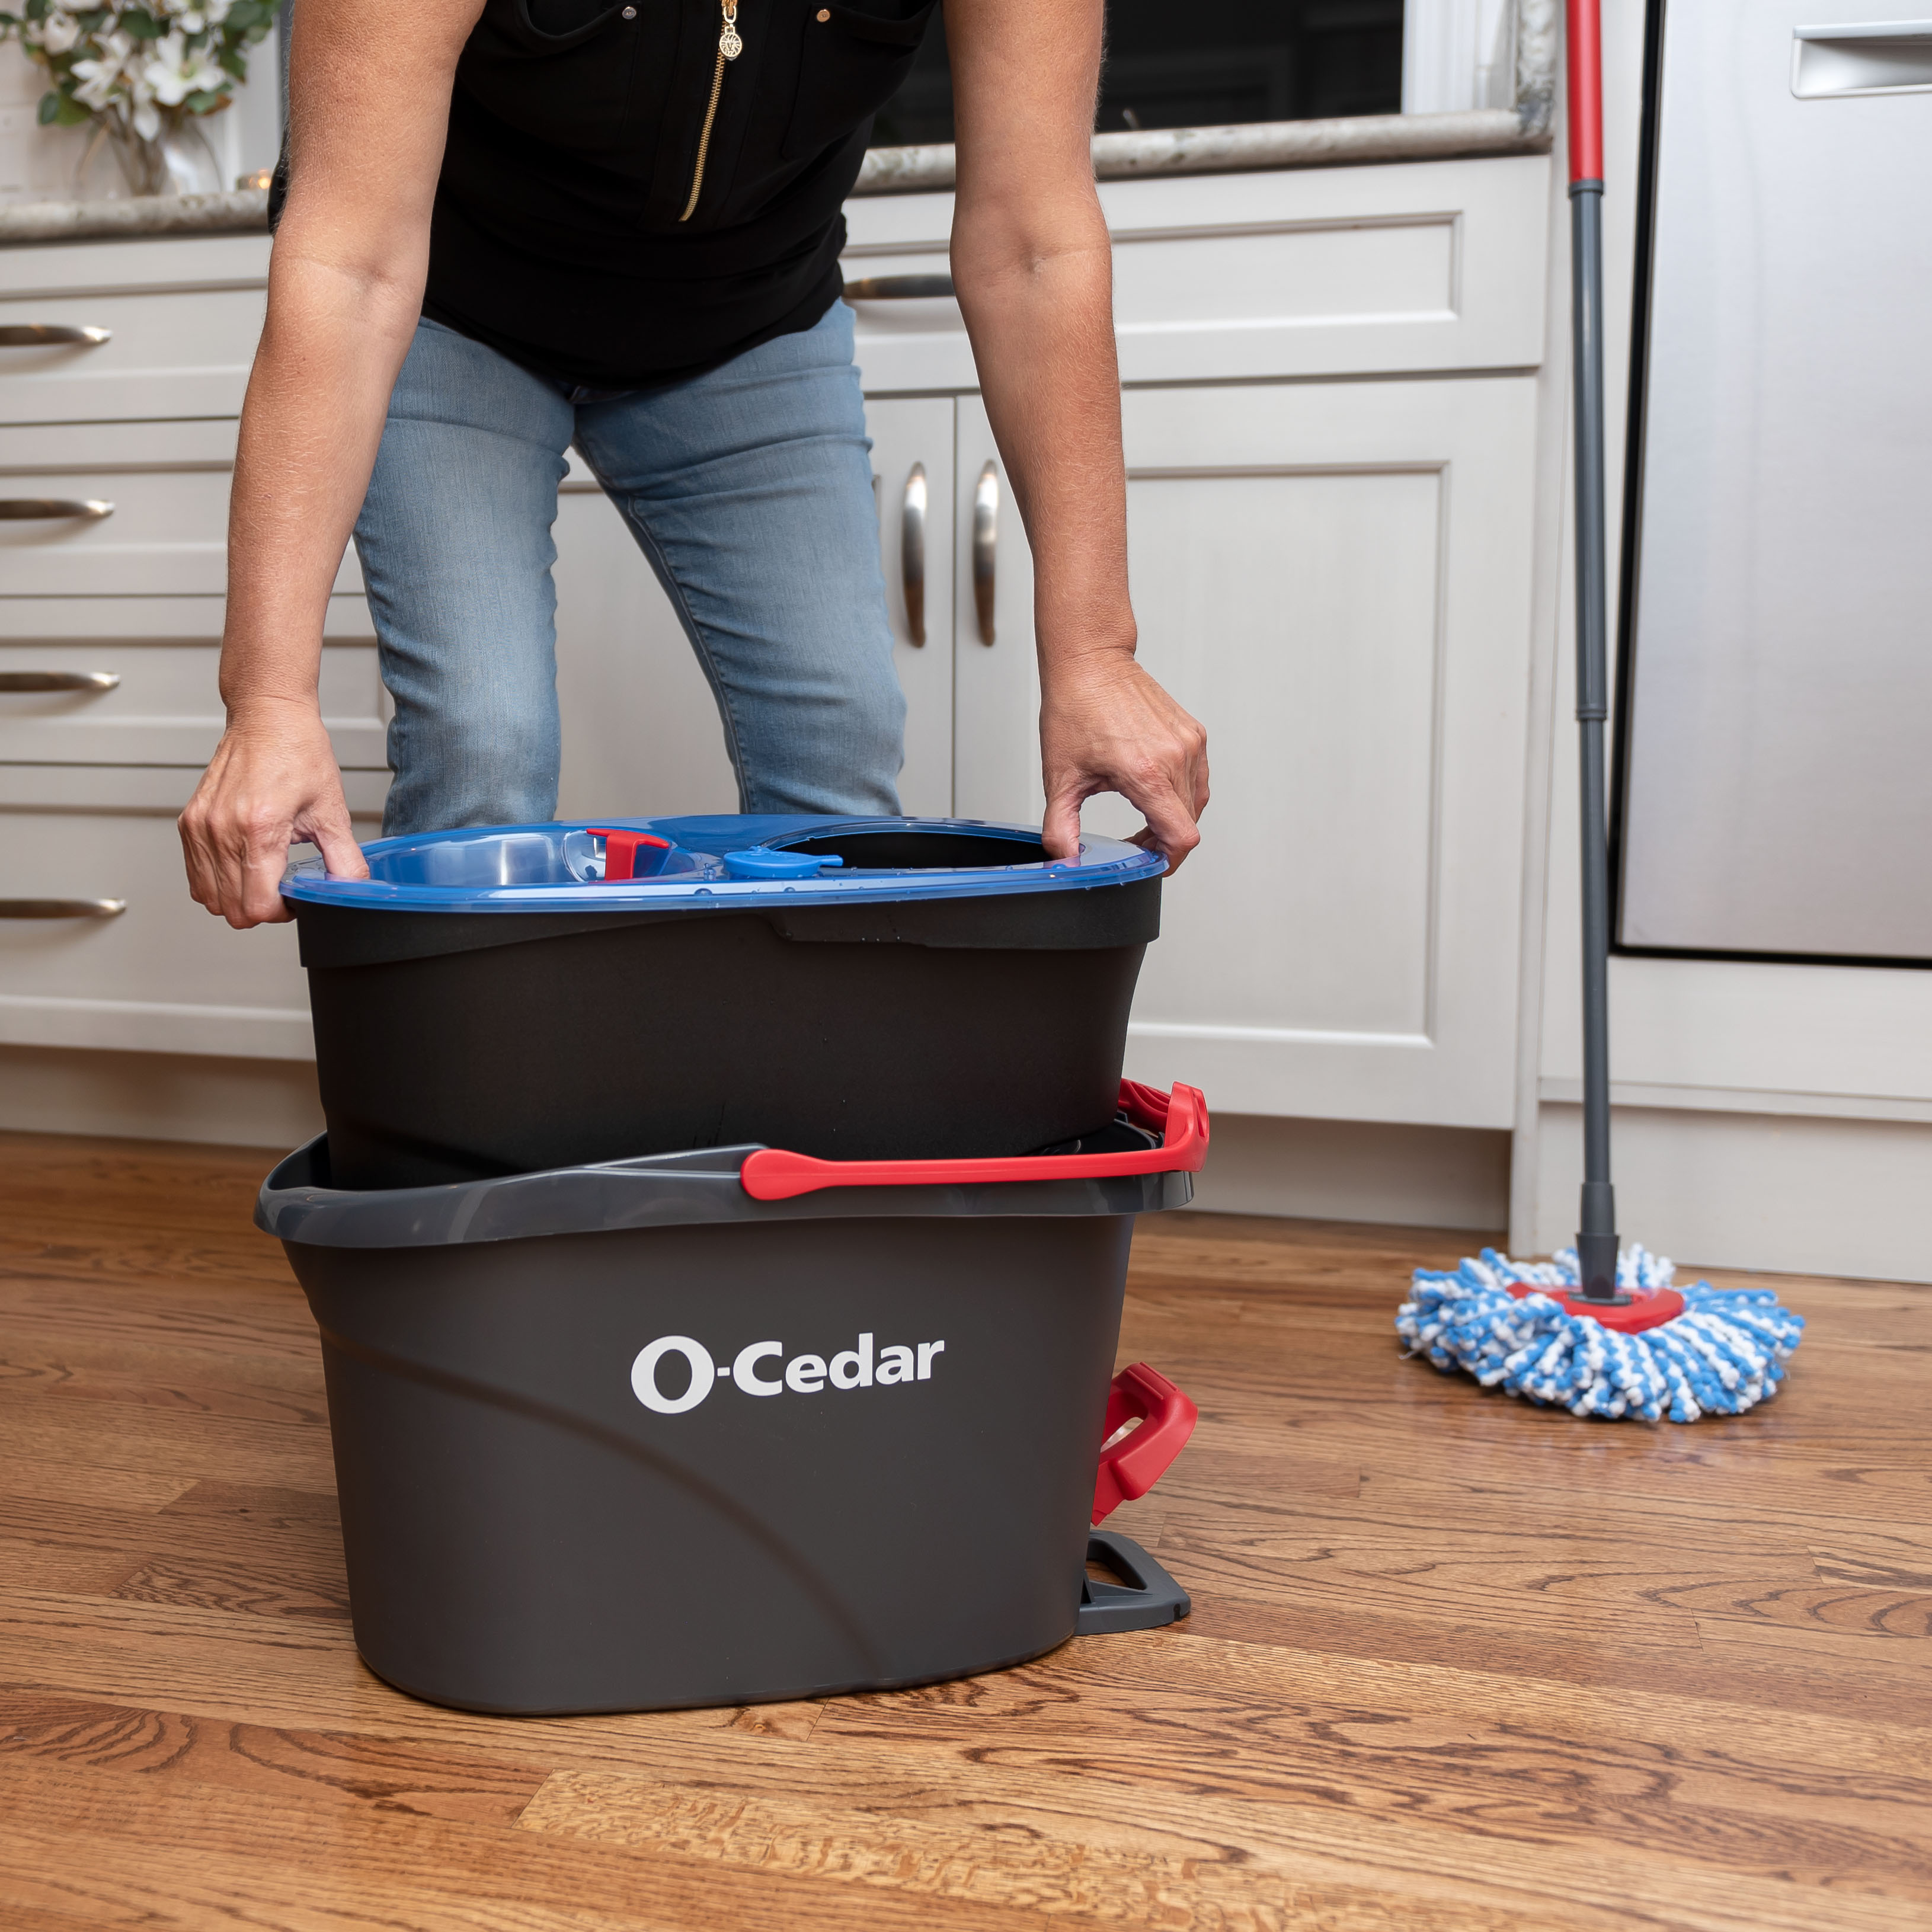 O-Cedar EasyWring RinseClean Spin Mop and Bucket System, Hands-Free System - image 19 of 25